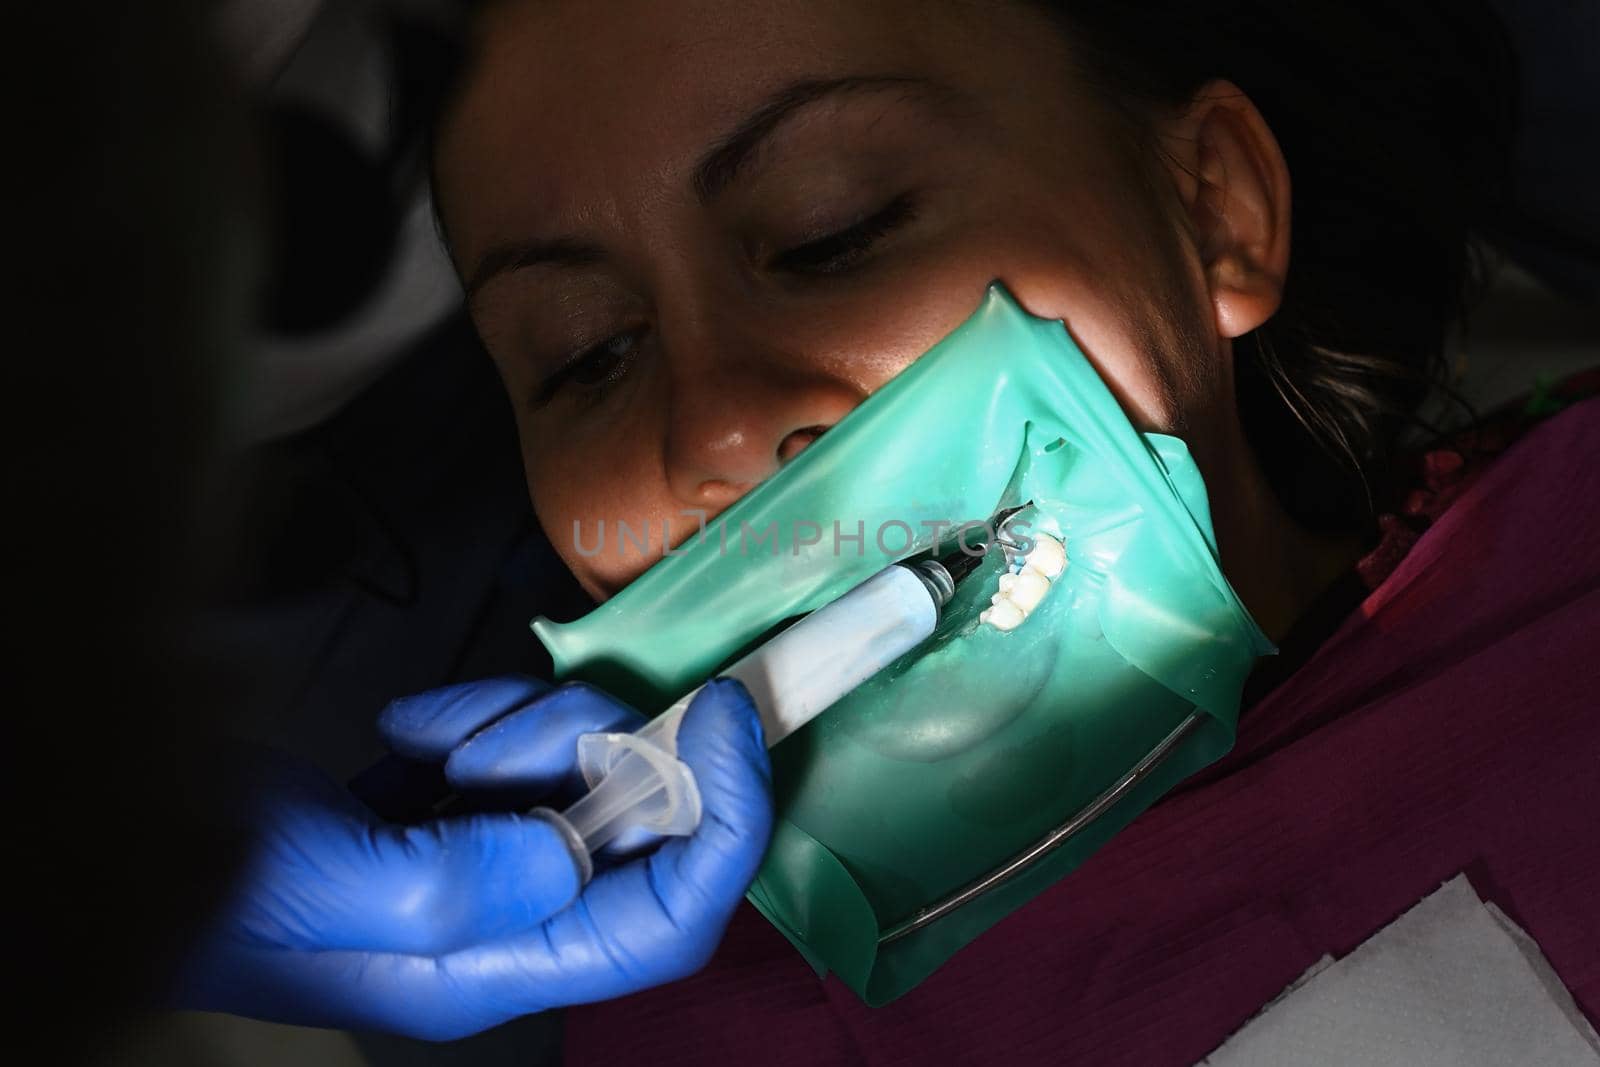 The dentist uses a blue gel to treat the patient's tooth. A woman at a dentist's appointment, a dentist uses a rubber dam and dental tools for treatment.2020